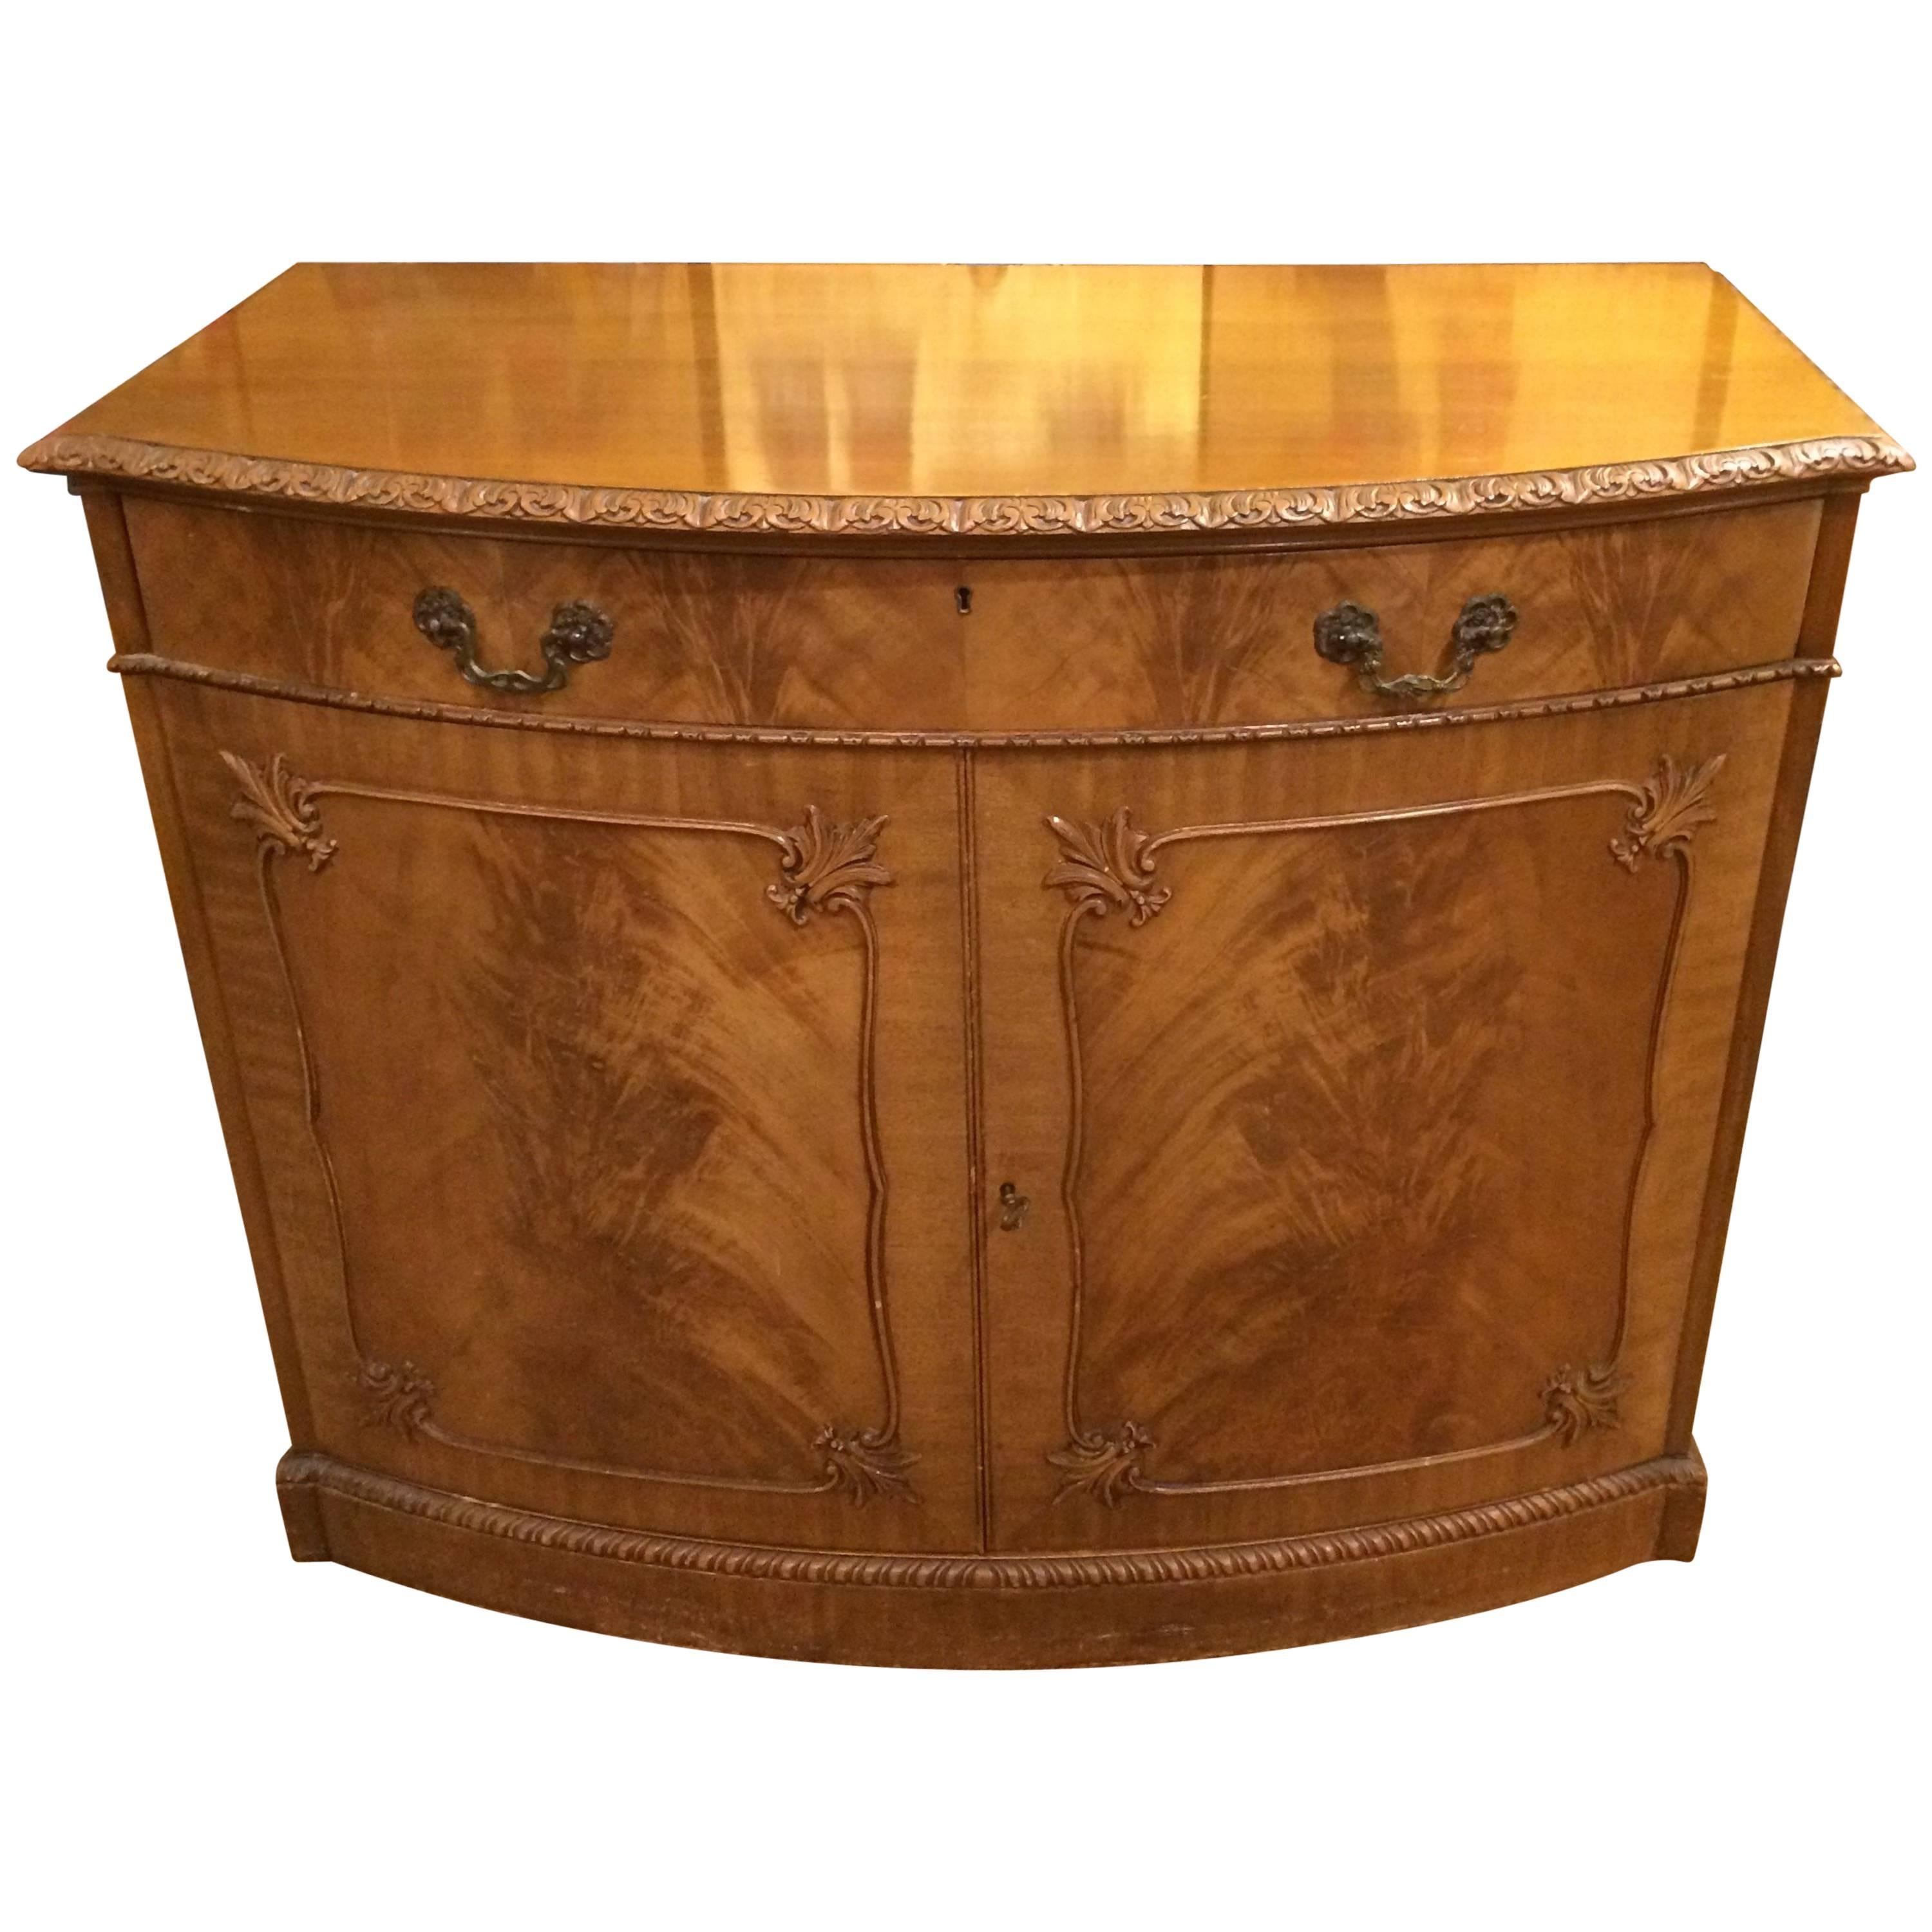 Luscious Burled Walnut Chest of Drawers with Front Panel Doors